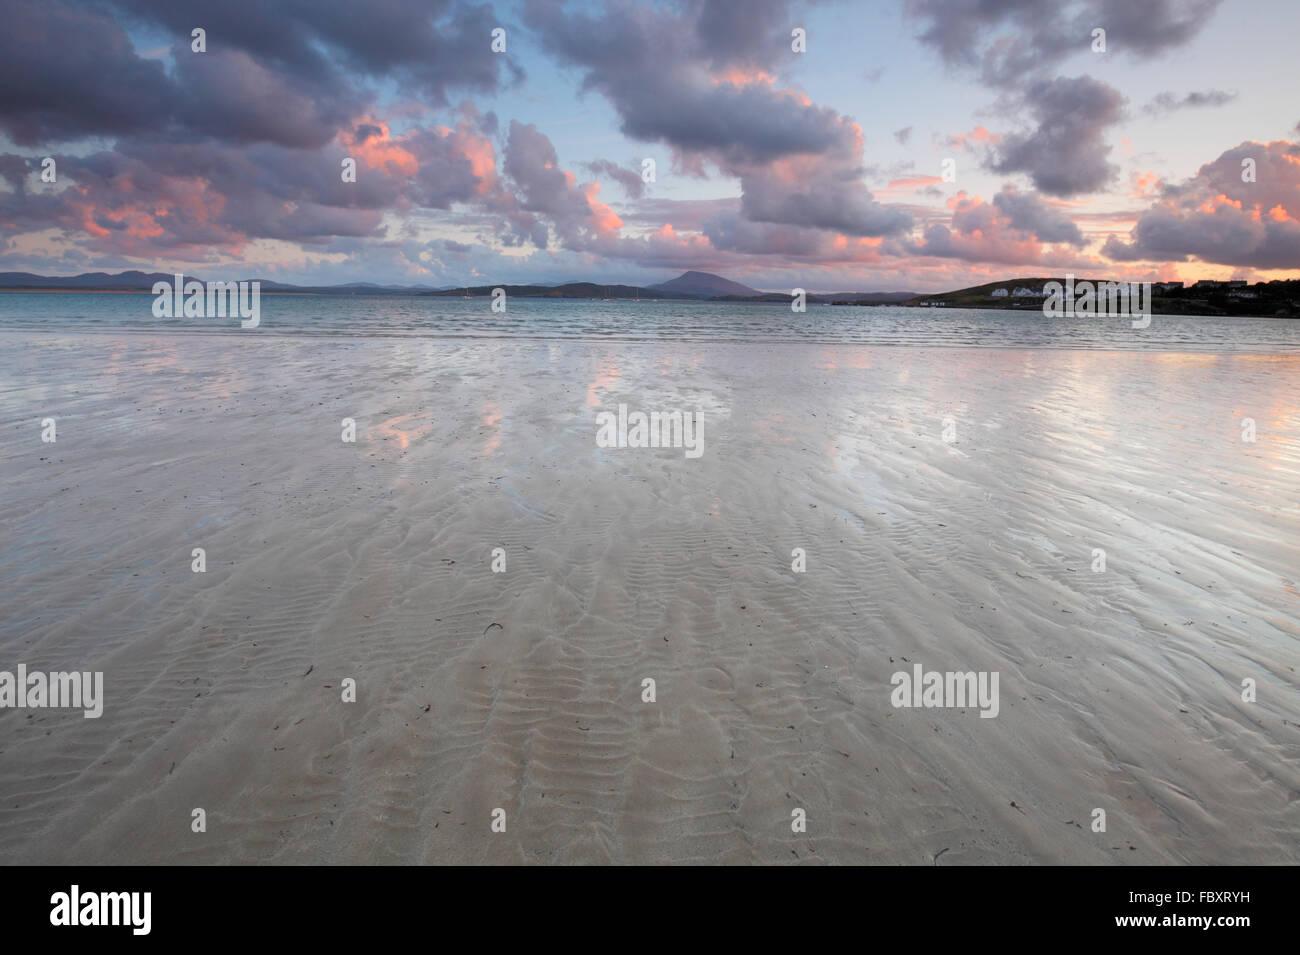 beach in Downings, Donegal, Ireland Stock Photo